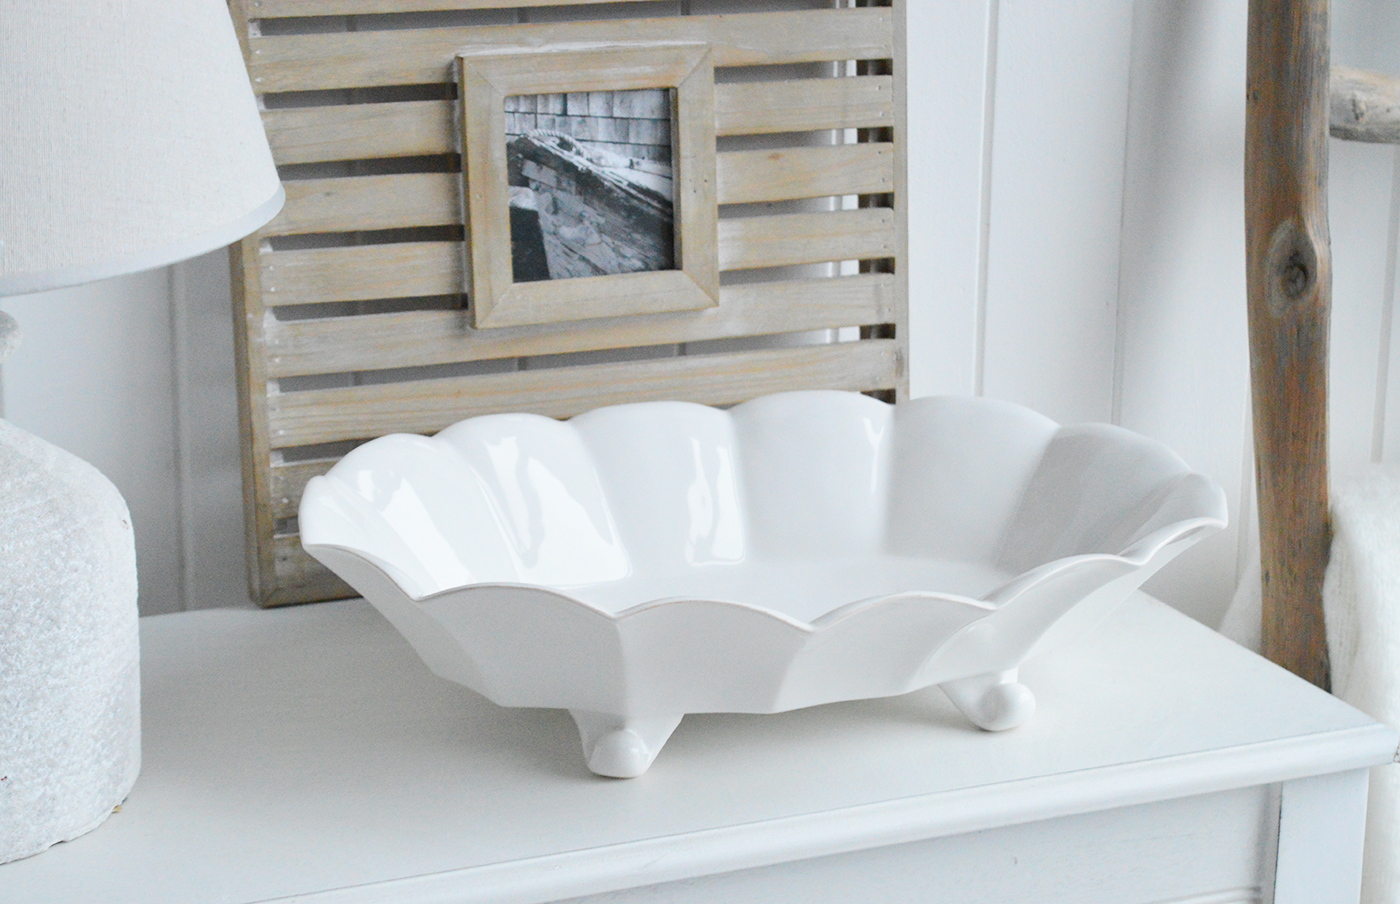 White Furniture and accessories for the home. Hyannis White Ceramic Bowl for New England, farmhouse,  Country and coastal homes and interior decor